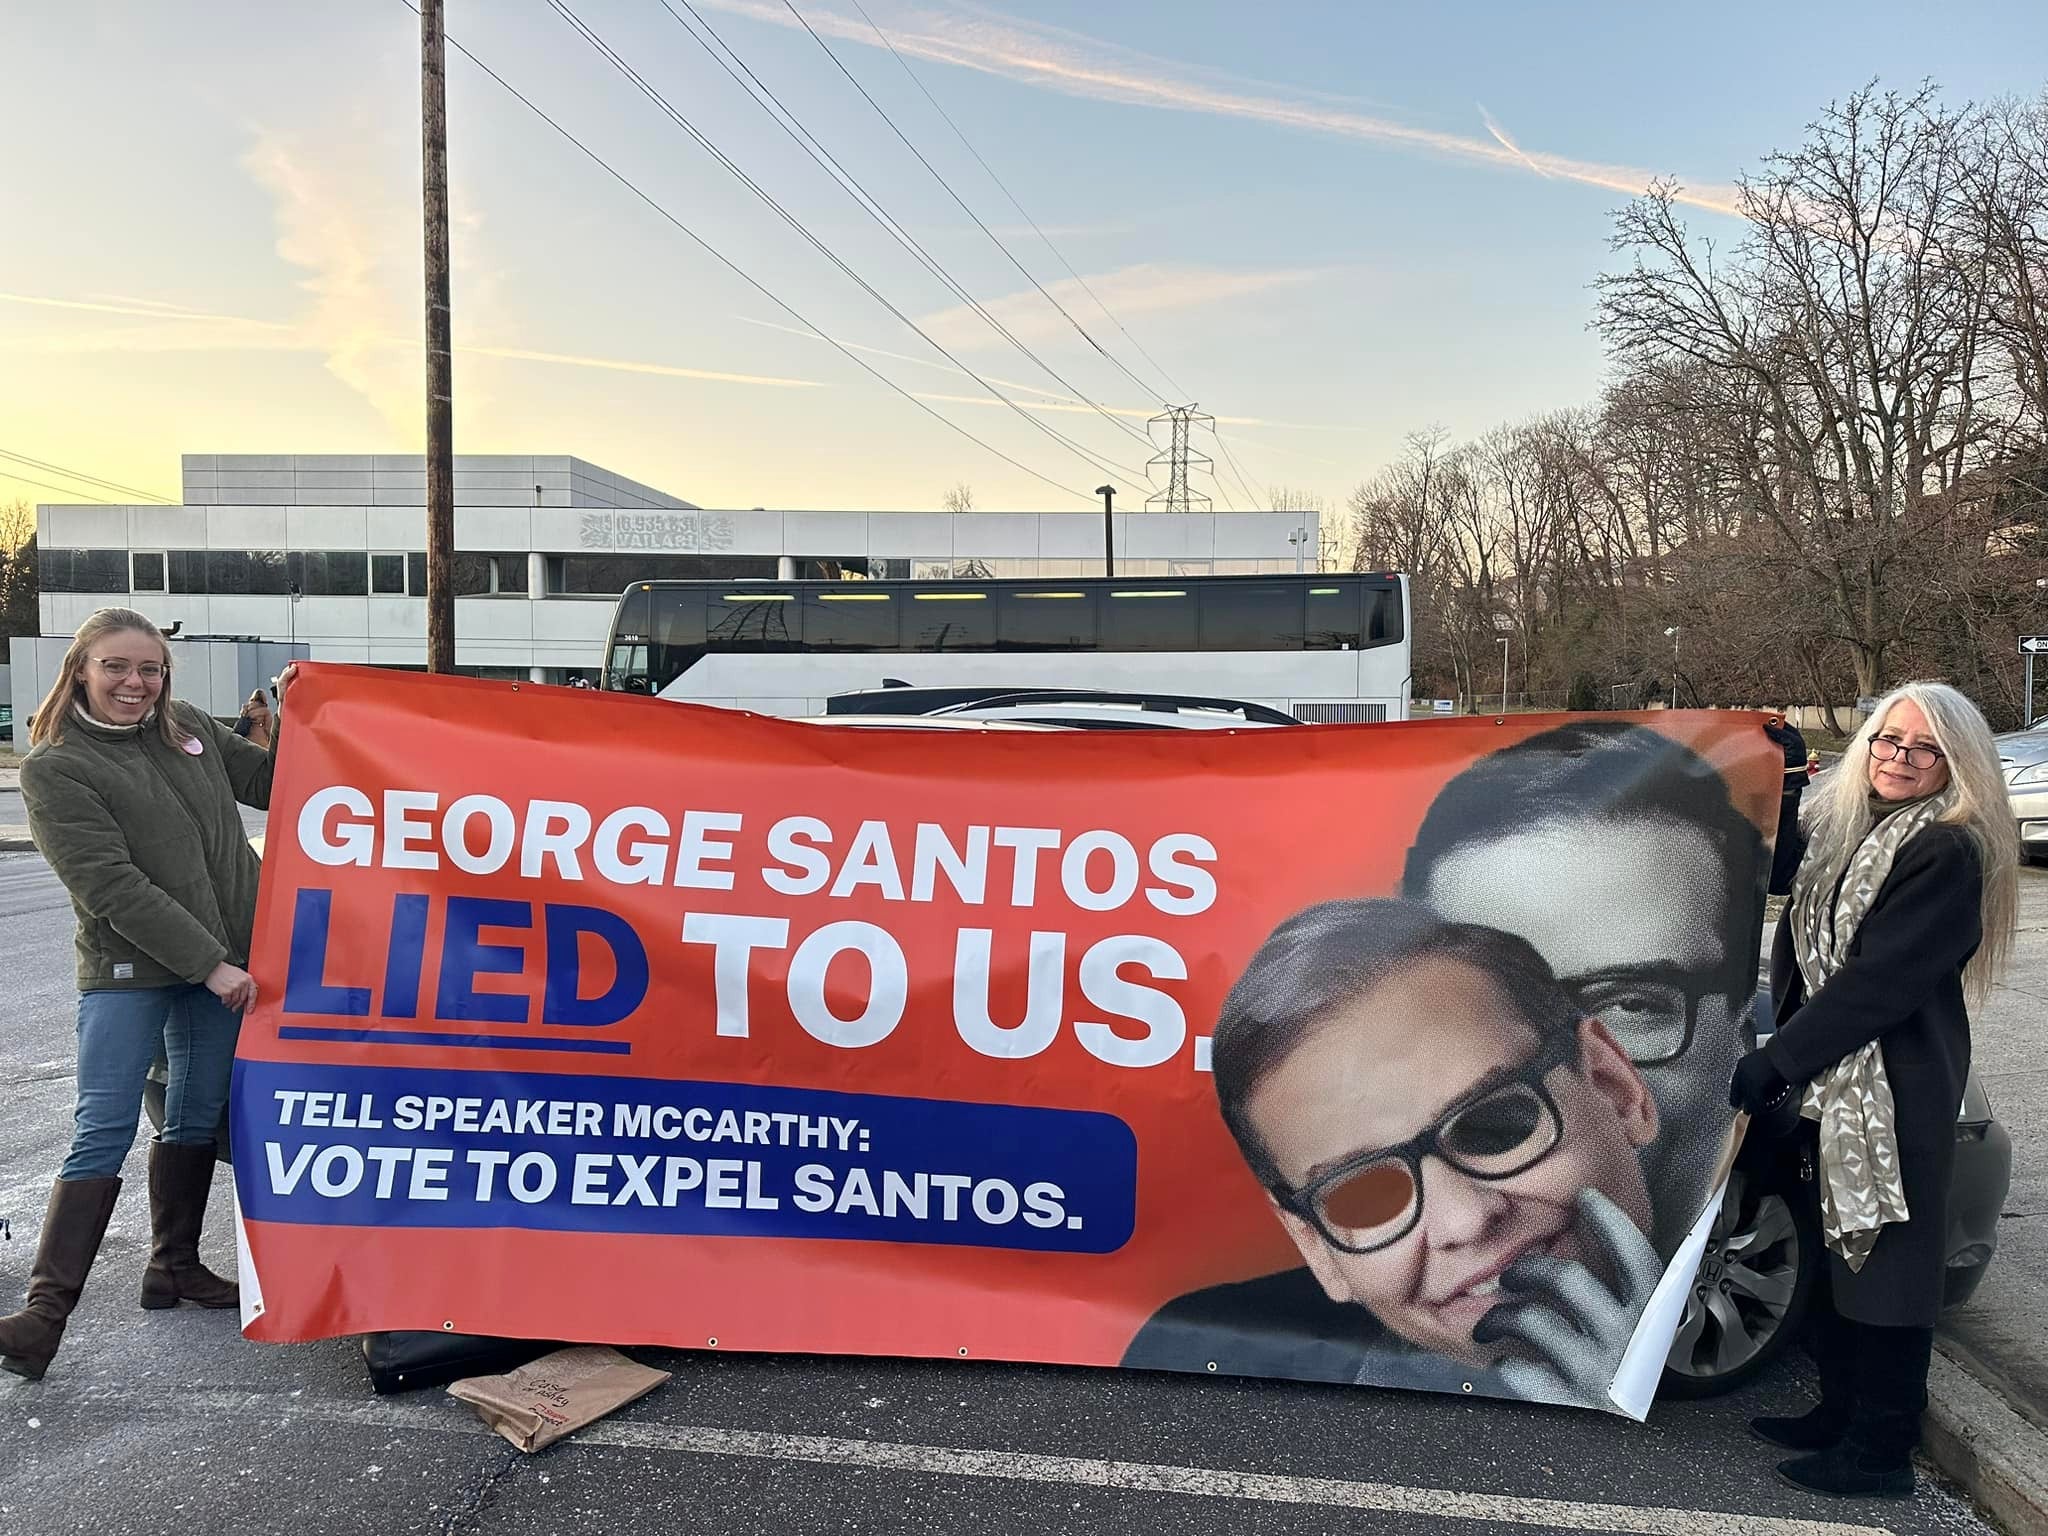 Members of the ‘Concerned Citizens of NY-03’ group reveal a banner slamming George Santos